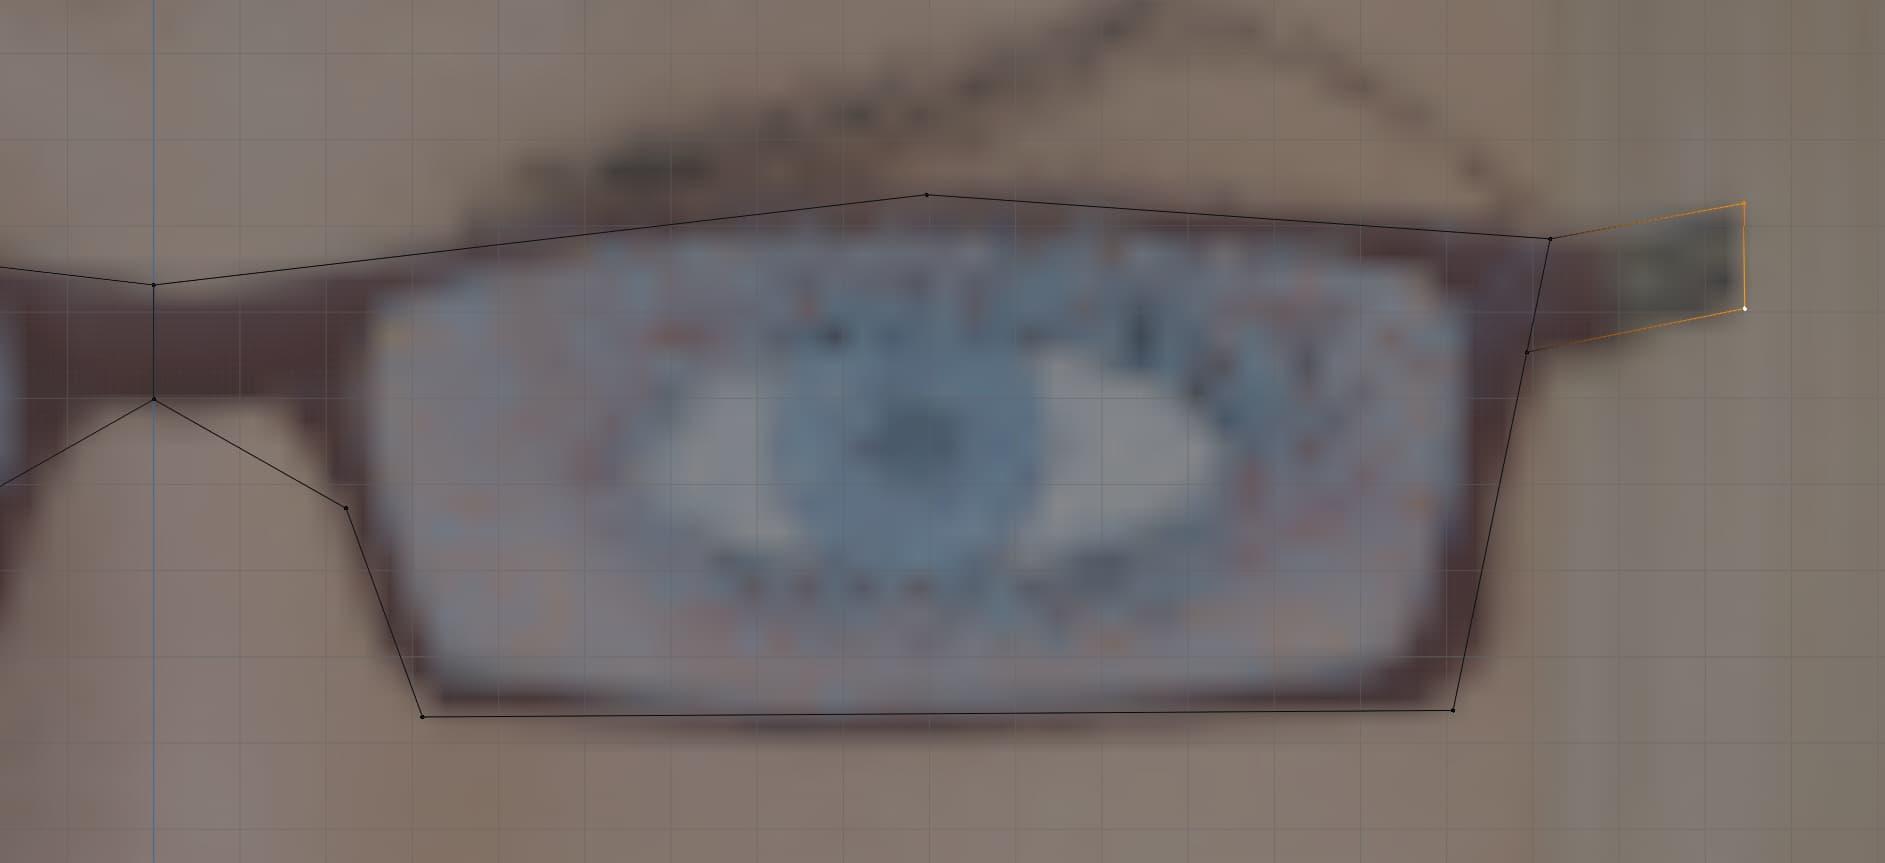 Points are lined up around a zoomed-in image of glasses